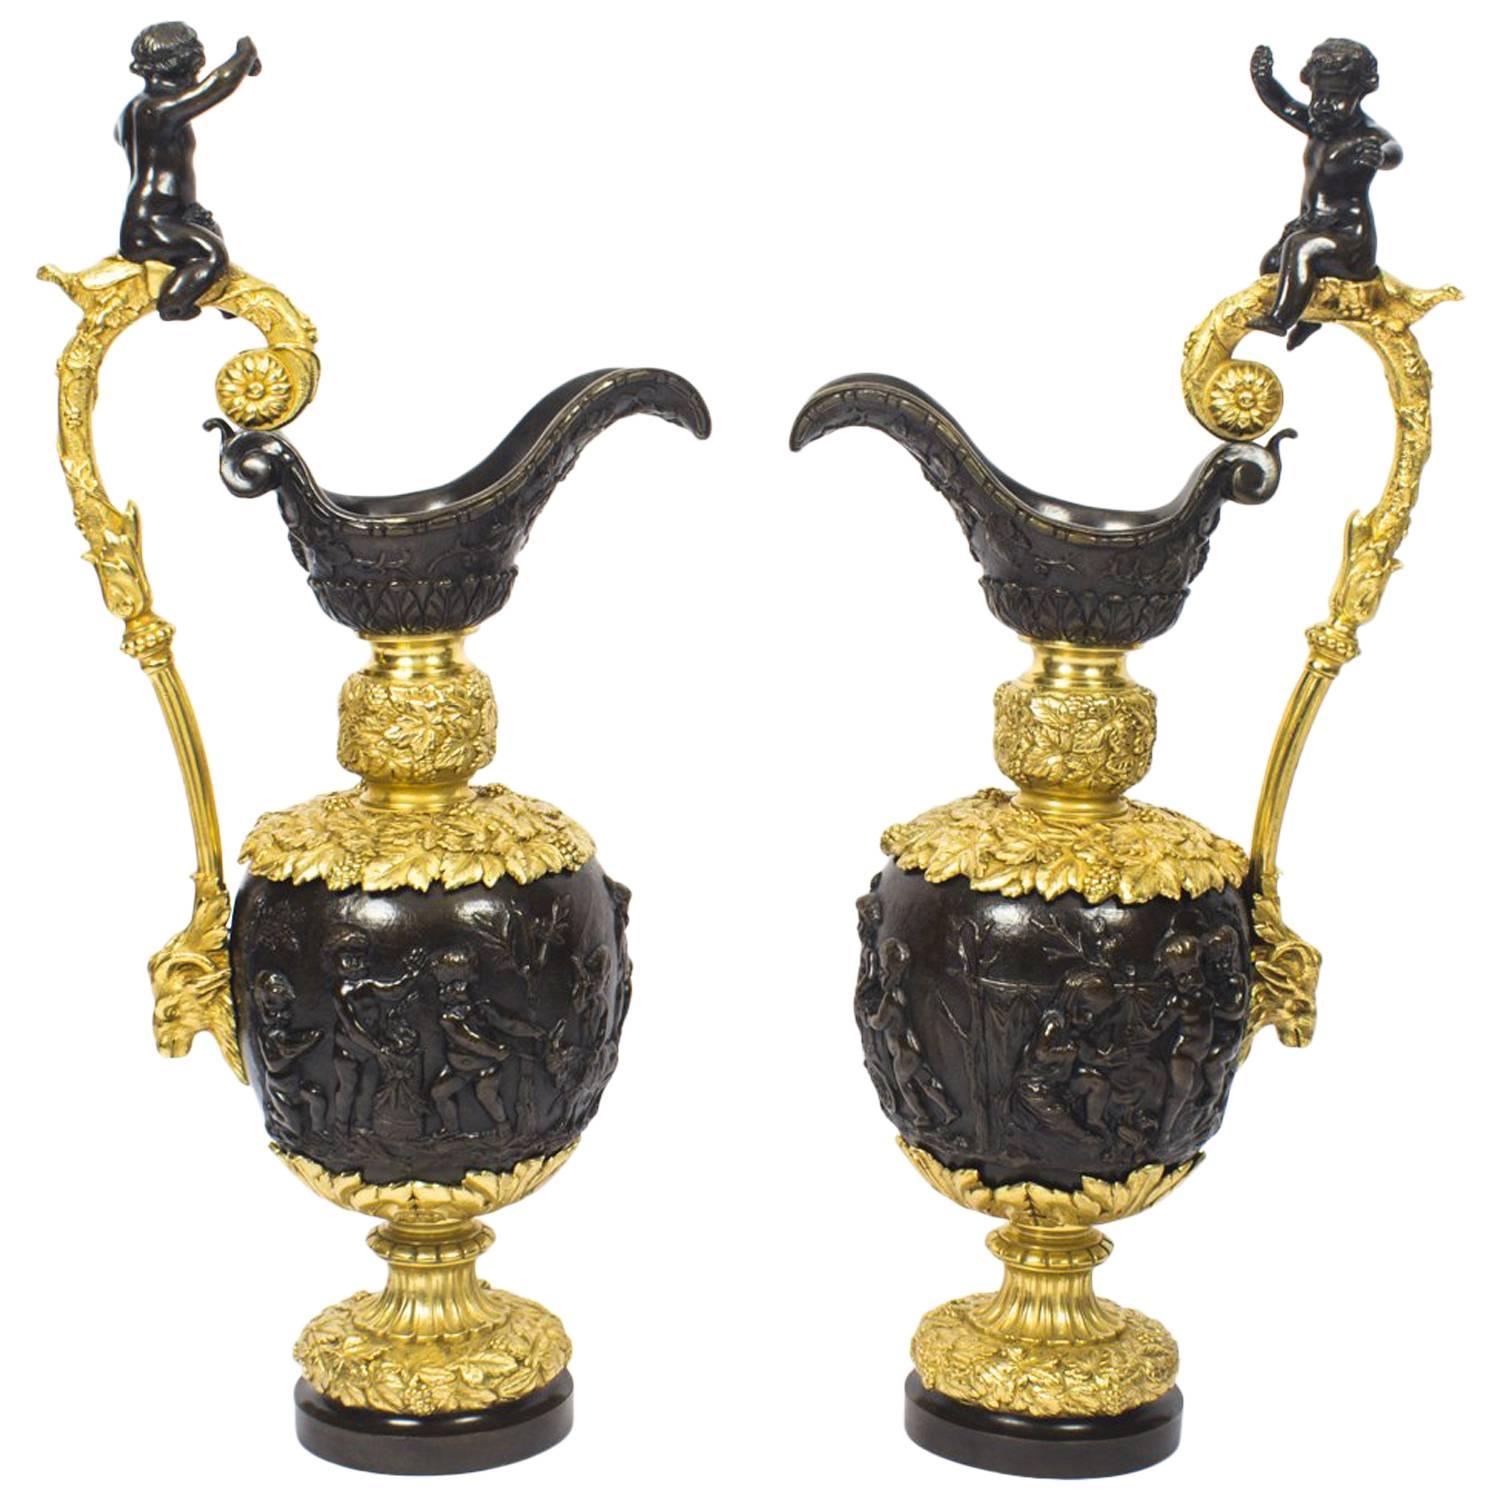 Antique Pair of French Gilt Bronze Ewers, 19th Century